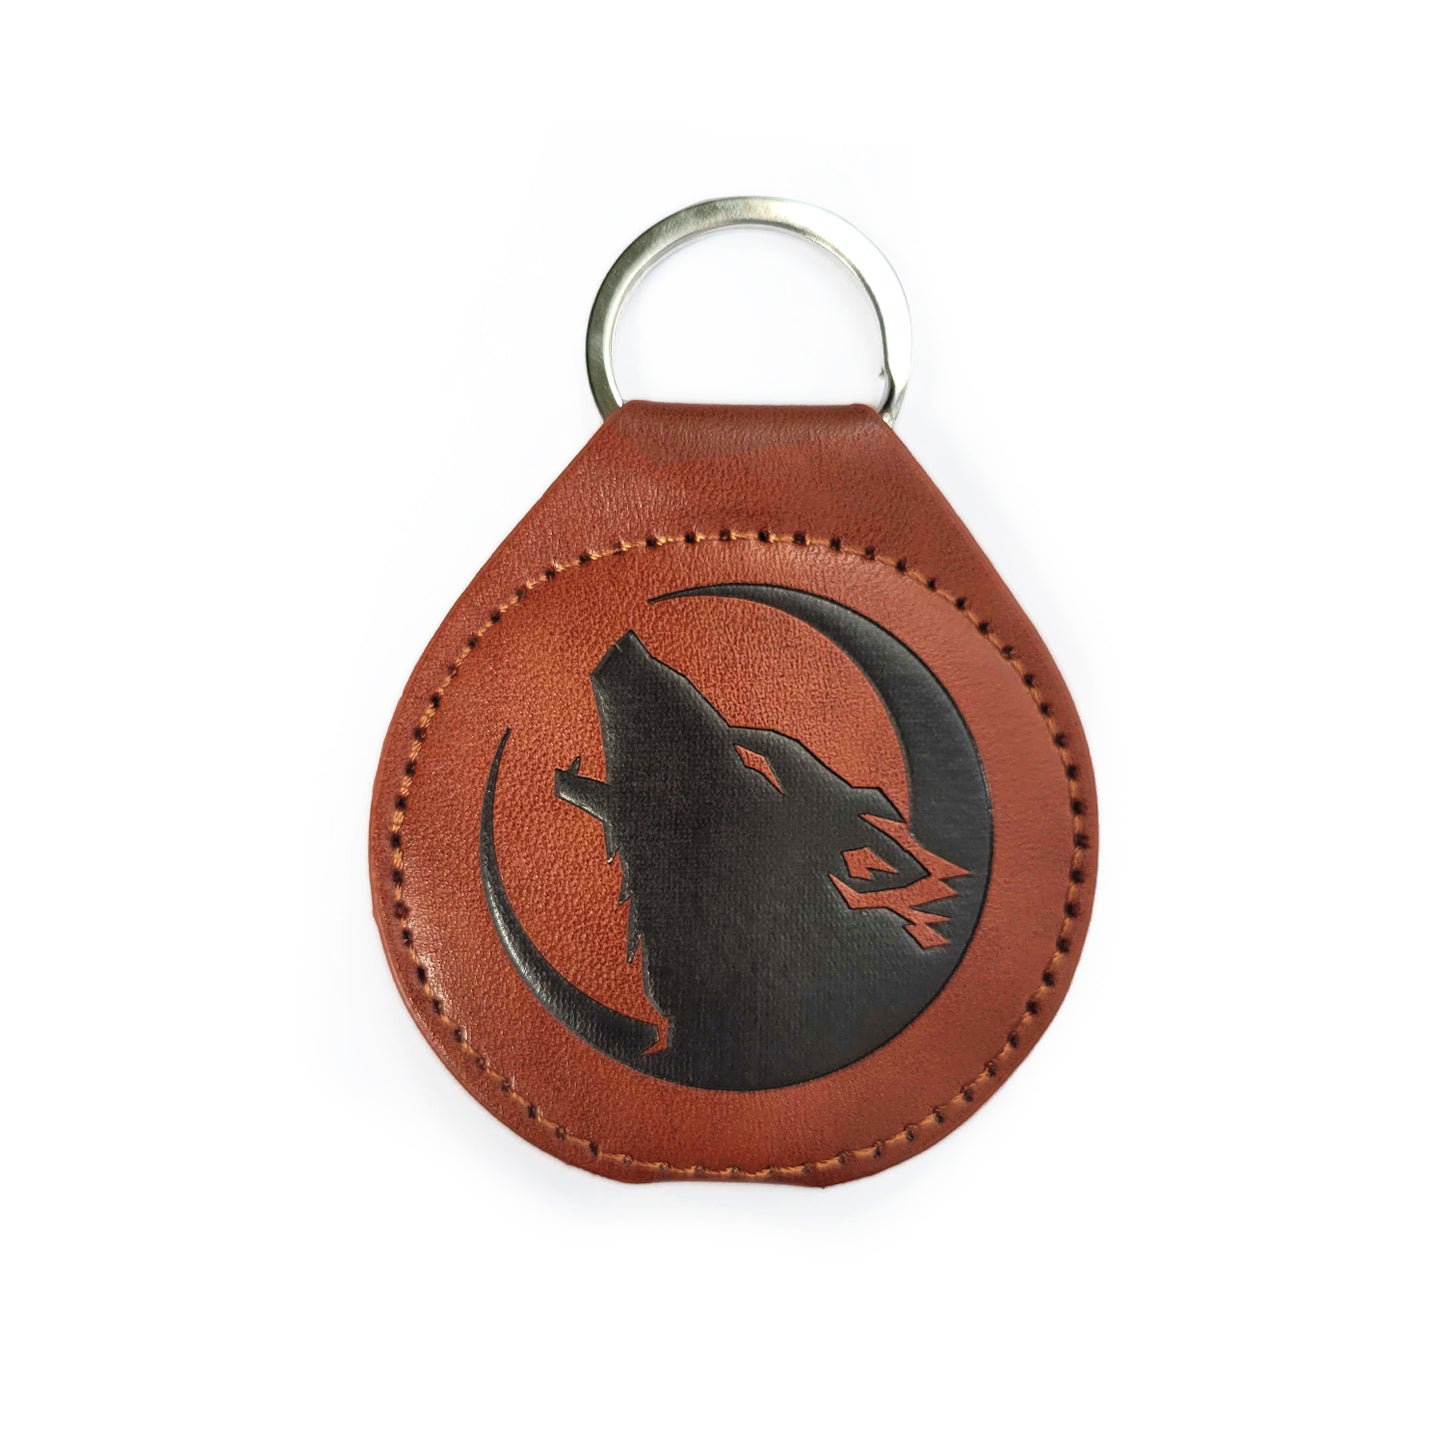 Load image into Gallery viewer, A round, leathery coin holder with a key ring at the top. In the center is a black embossed image of a howling wolf inside a crescent moon.
